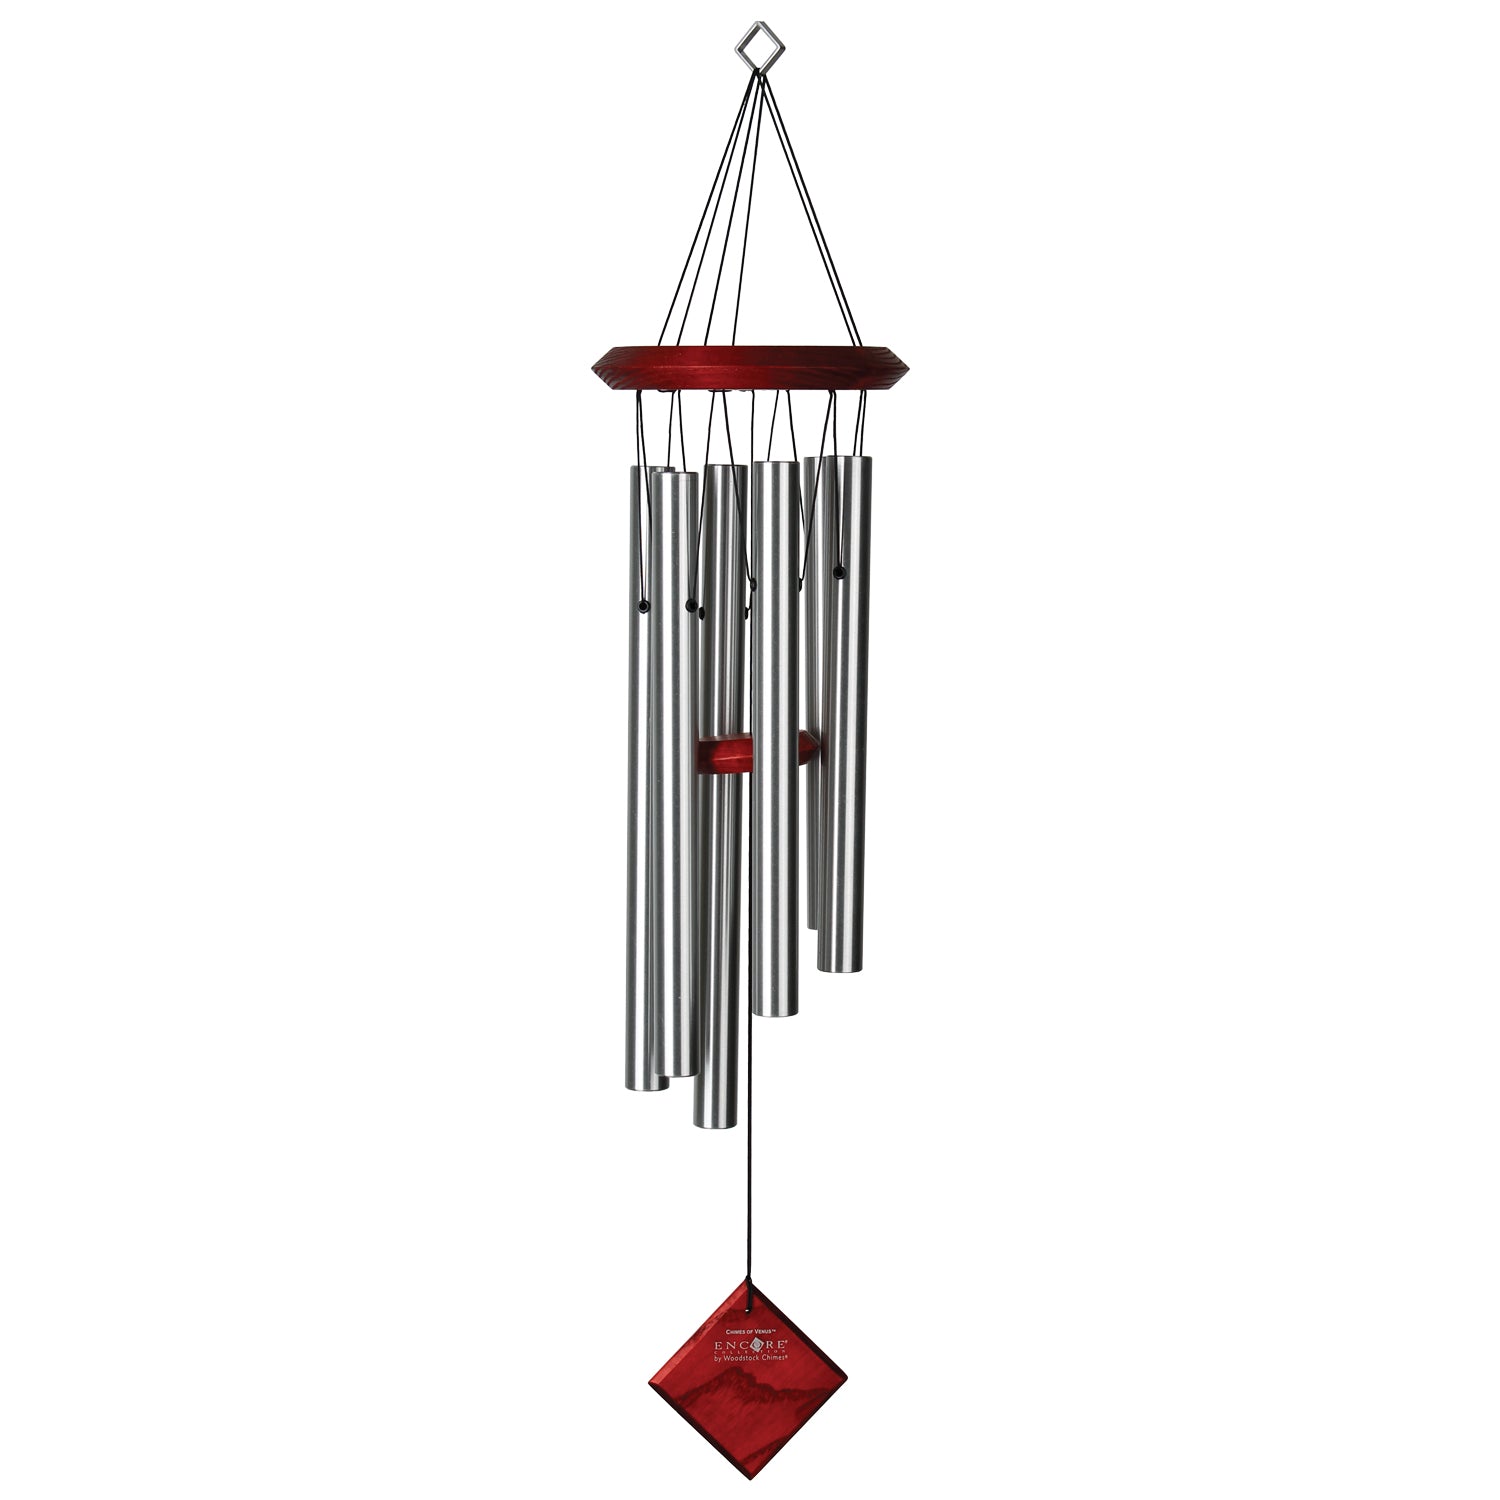 Woodstock Chimes of Pluto - Silver